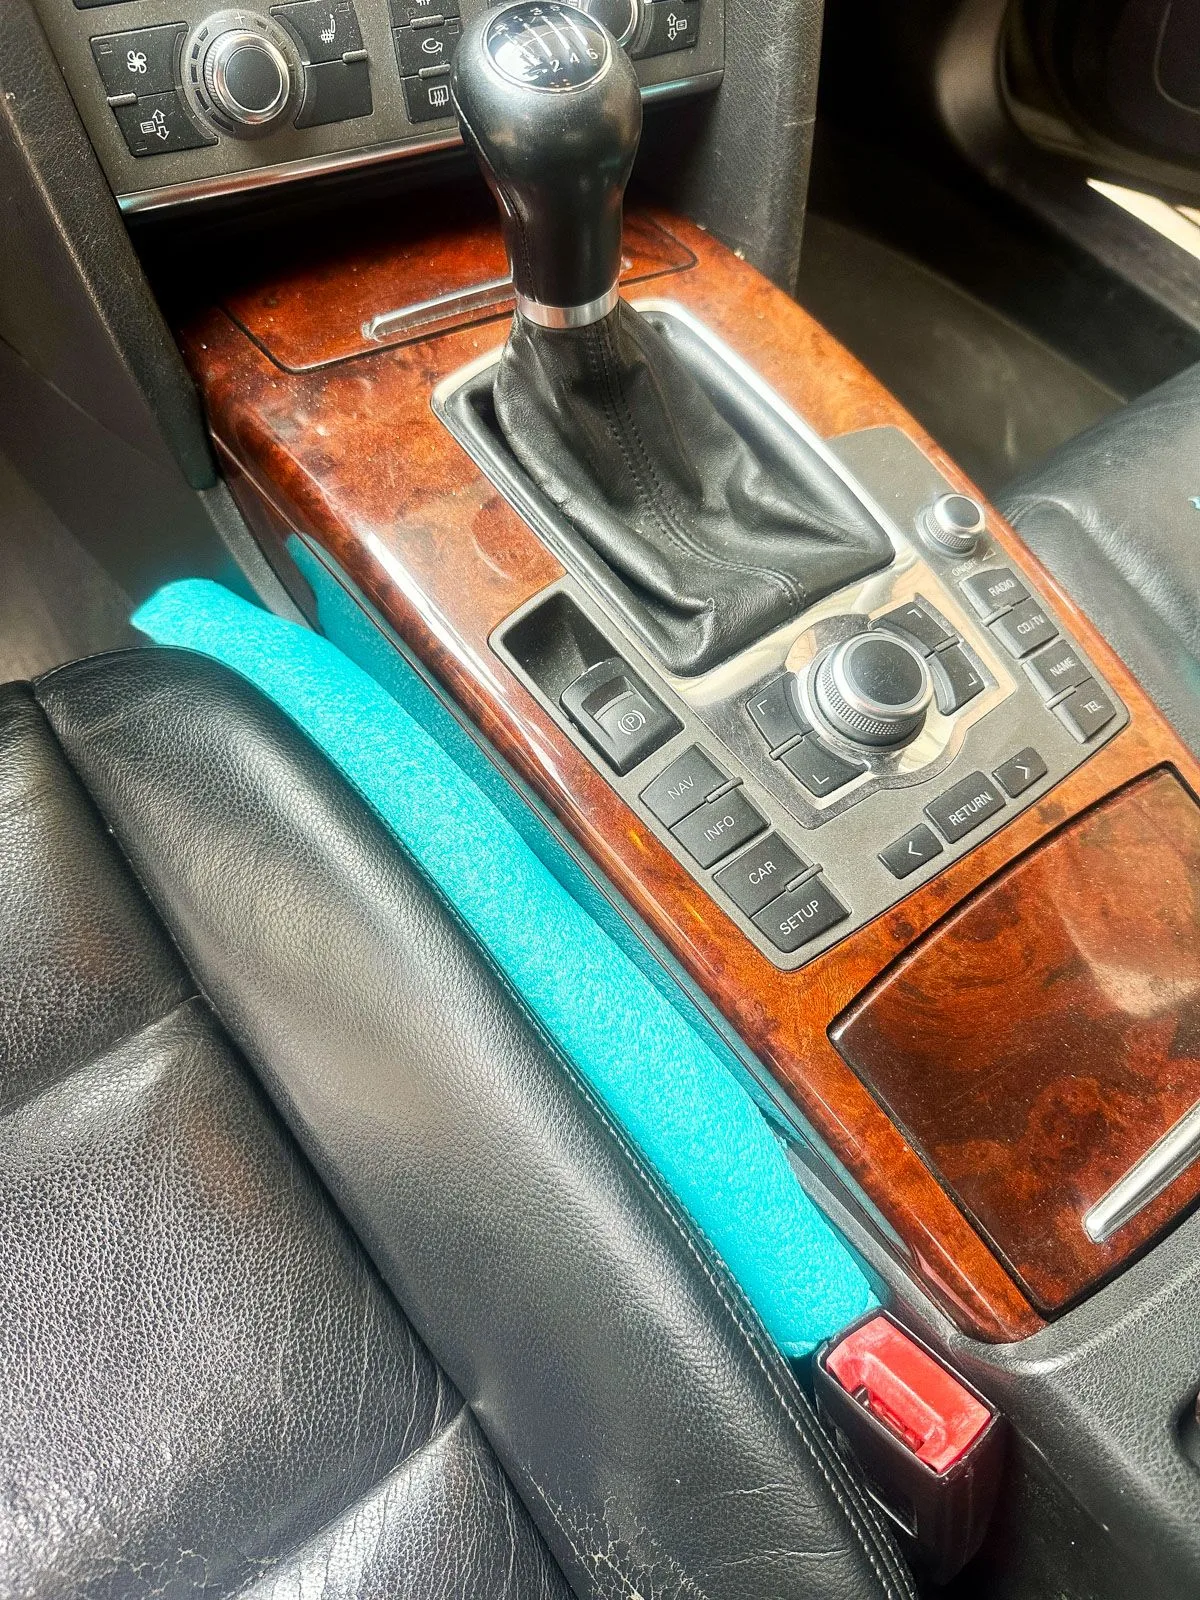 Place Pool Noodles Between the Car Seats to Avoid Losing Items